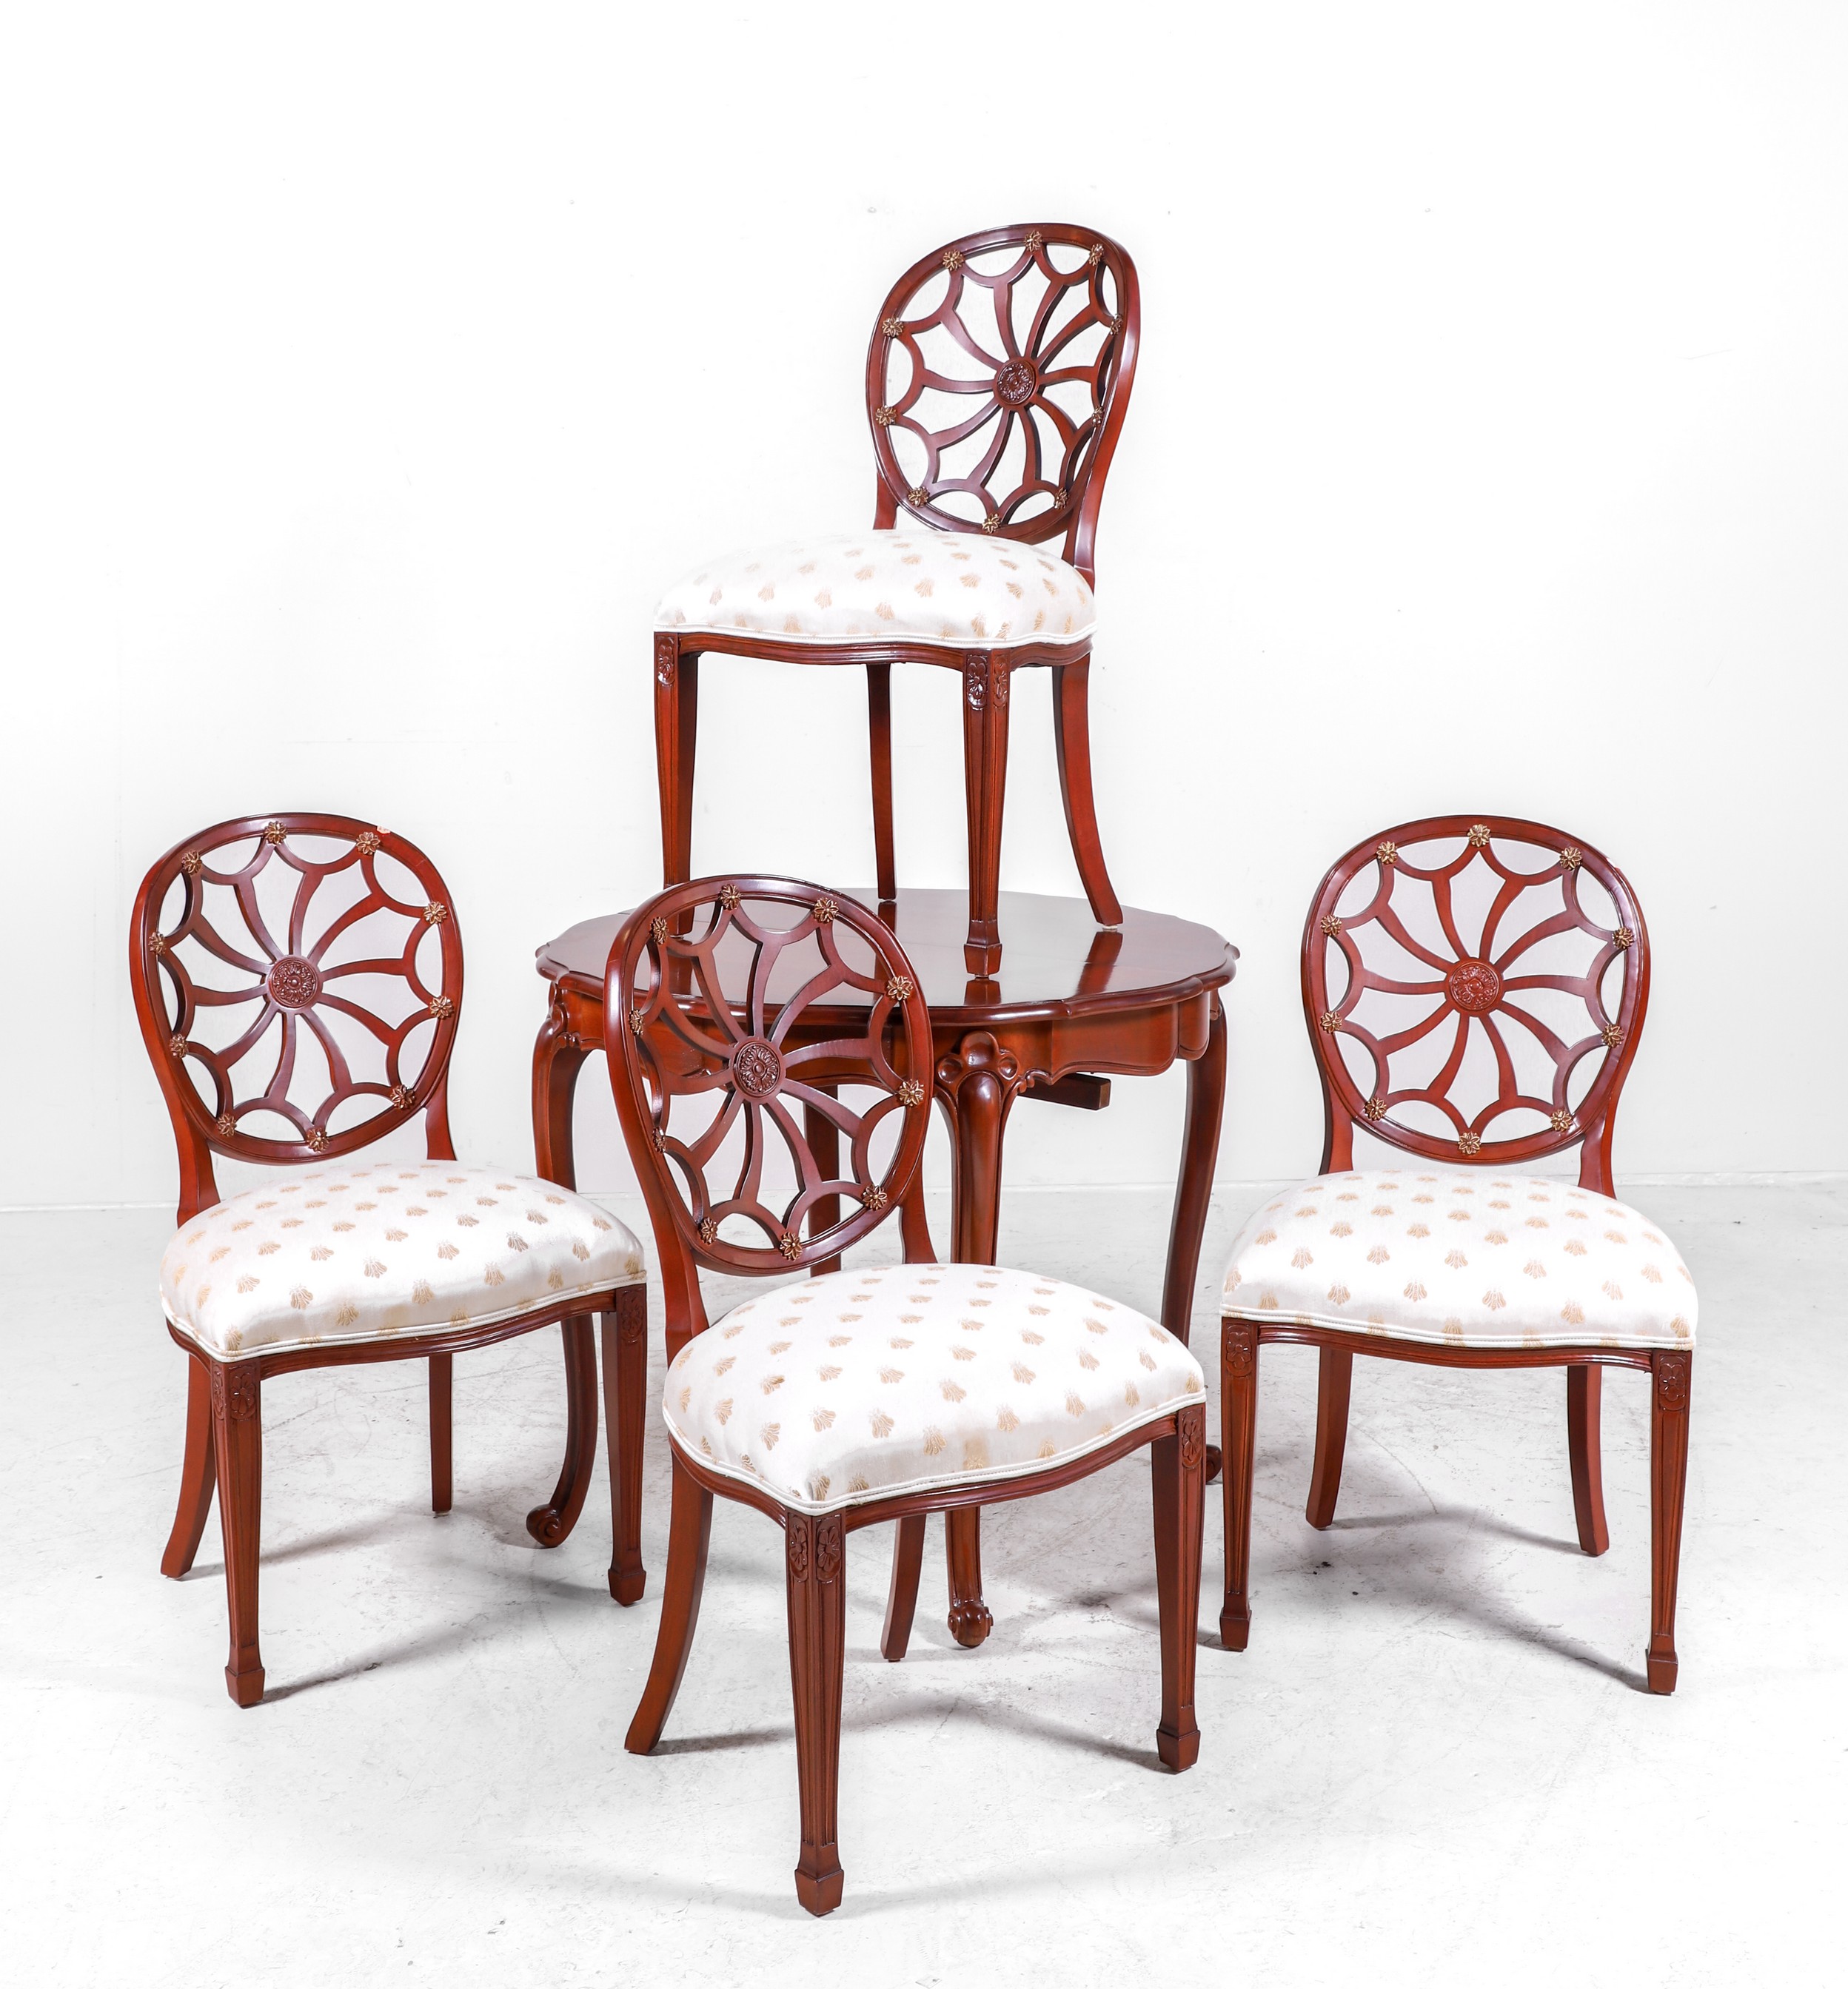  5 pc Councill dining set co 3b680d